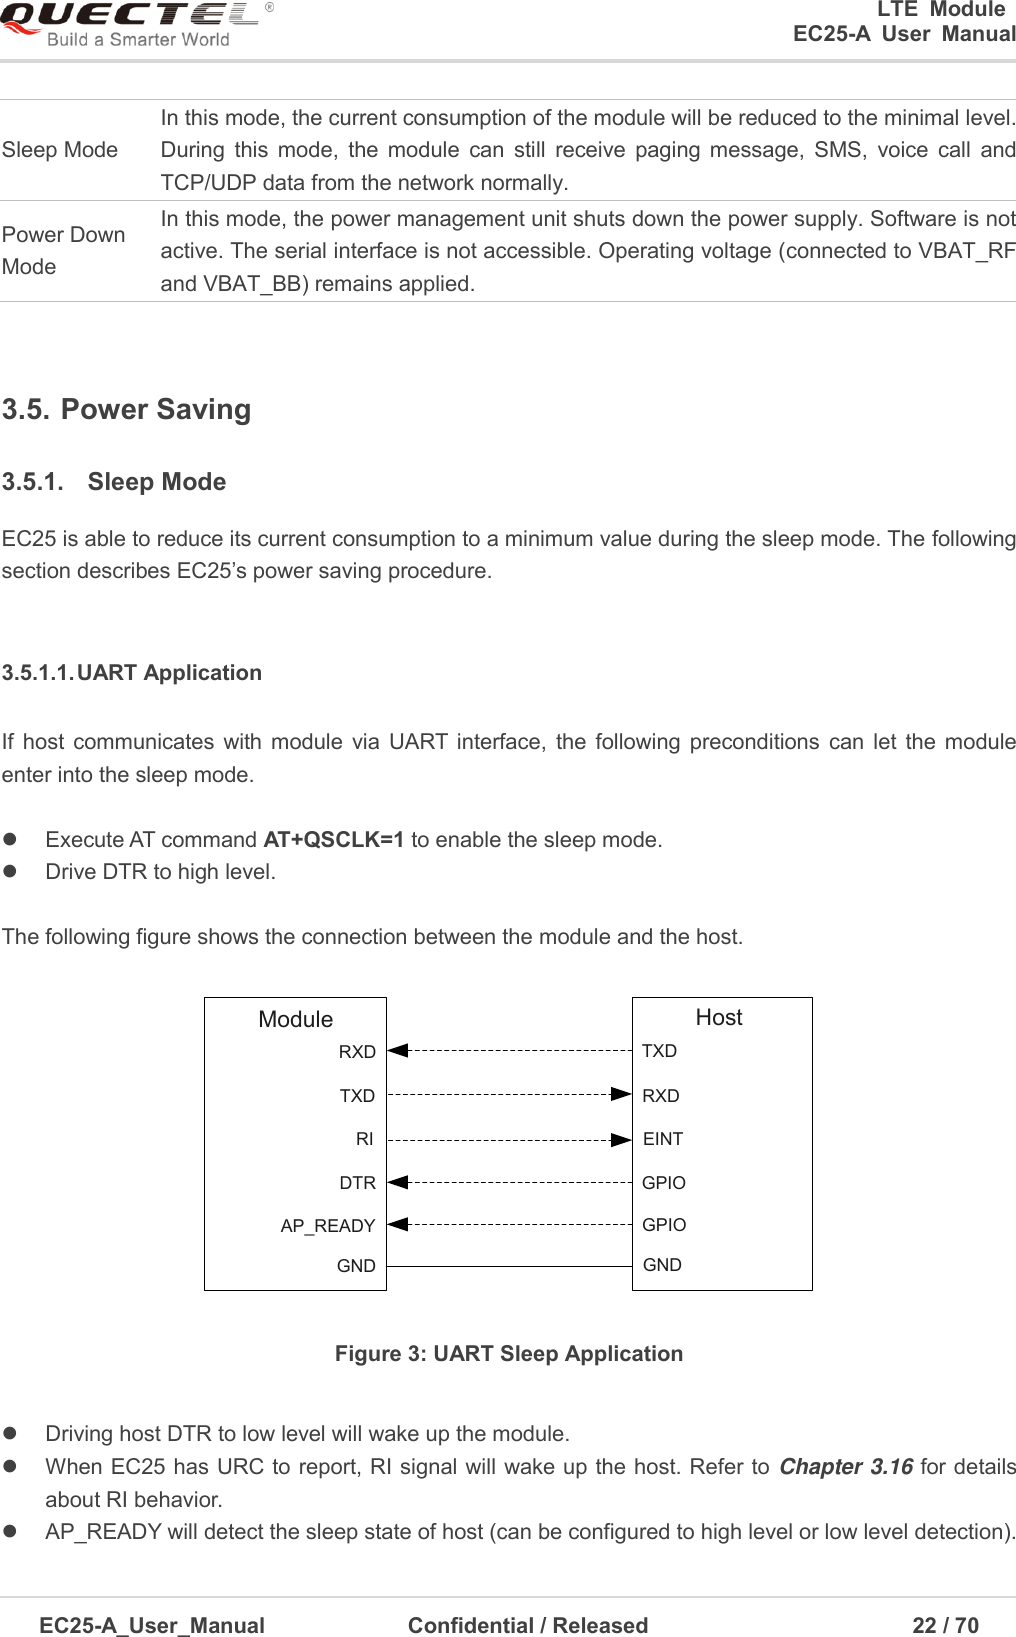 0                                                                       LTE  Module                                                    EC25-A  User  Manual  EC25-A_User_Manual               Confidential / Released                                            22 / 7      Sleep Mode In this mode, the current consumption of the module will be reduced to the minimal level. During  this  mode,  the  module  can  still  receive  paging  message,  SMS,  voice  call  and TCP/UDP data from the network normally. Power Down Mode In this mode, the power management unit shuts down the power supply. Software is not active. The serial interface is not accessible. Operating voltage (connected to VBAT_RF and VBAT_BB) remains applied.  3.5. Power Saving   3.5.1.  Sleep Mode EC25 is able to reduce its current consumption to a minimum value during the sleep mode. The following section describes EC25’s power saving procedure.  3.5.1.1. UART Application If  host communicates with  module  via  UART  interface,  the  following  preconditions  can  let  the  module enter into the sleep mode.    Execute AT command AT+QSCLK=1 to enable the sleep mode.   Drive DTR to high level.    The following figure shows the connection between the module and the host. RXDTXDRIDTRAP_READYTXDRXDEINTGPIOGPIOModule HostGND GND Figure 3: UART Sleep Application    Driving host DTR to low level will wake up the module.     When EC25 has URC to report, RI signal will wake up the host. Refer to Chapter 3.16 for details about RI behavior.   AP_READY will detect the sleep state of host (can be configured to high level or low level detection). 